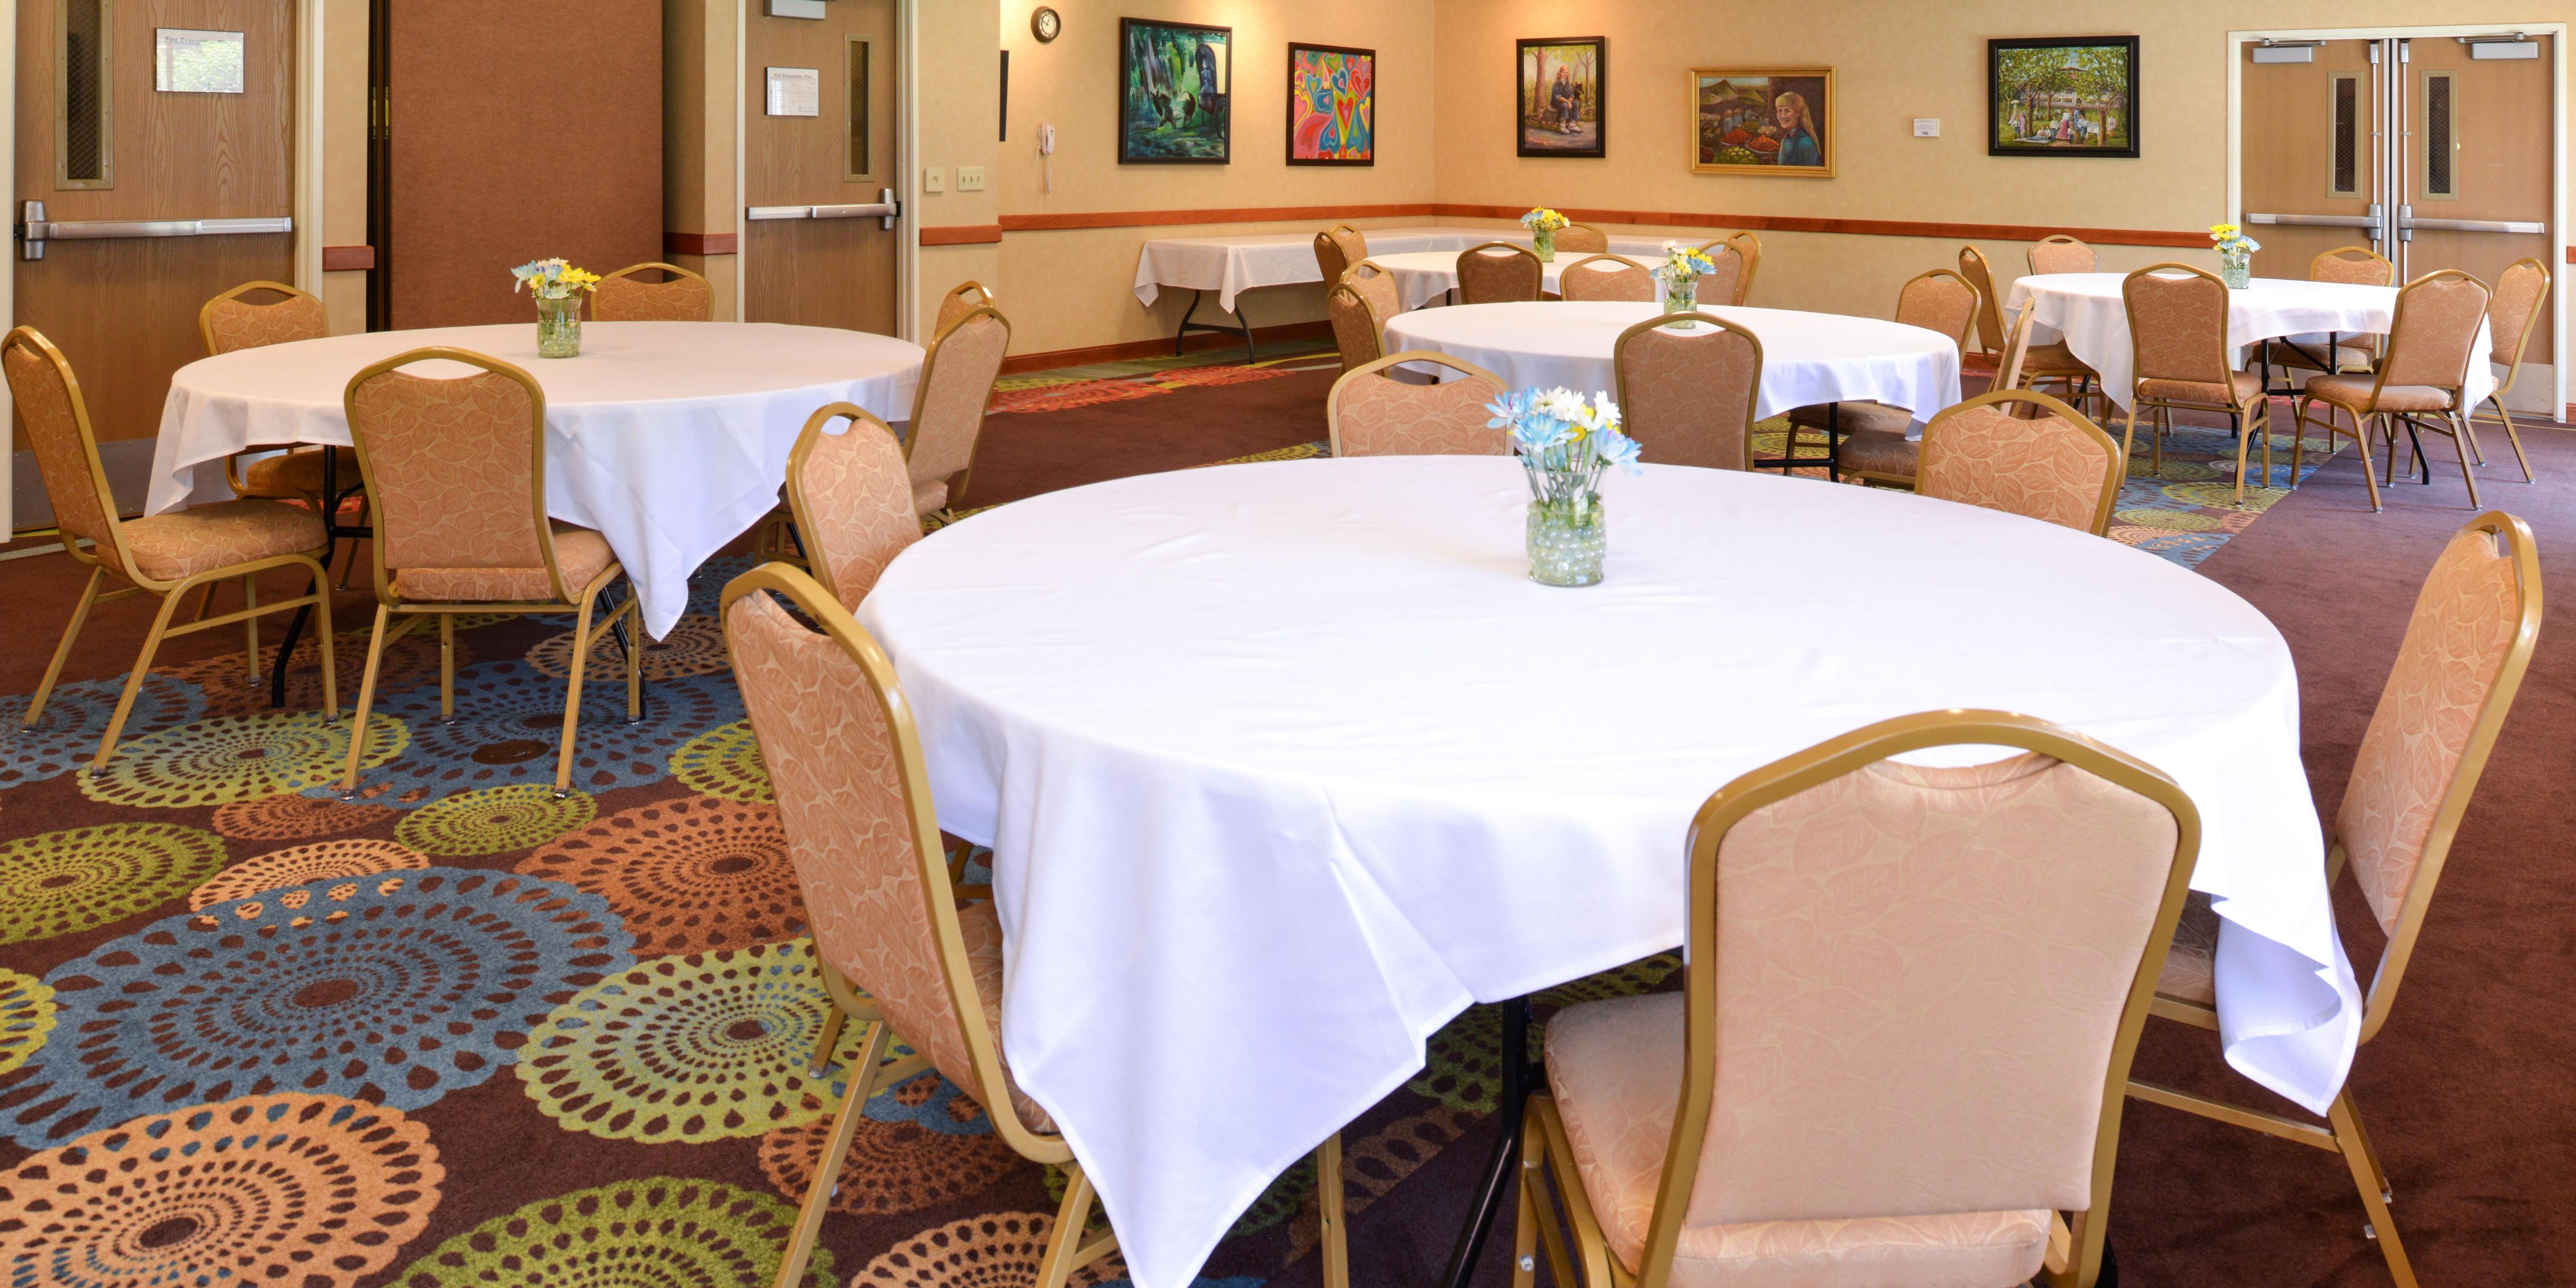 Small meetings play a vital role in the success of many organizations. Are you planning a small corporate meeting, board retreat or brainstorming session? Our flexible meeting space is sure to lead to big ideas! Whether you're a group of 15 or 70, we can help! Our Director of Sales is dedicated to making your meeting a huge success!  
